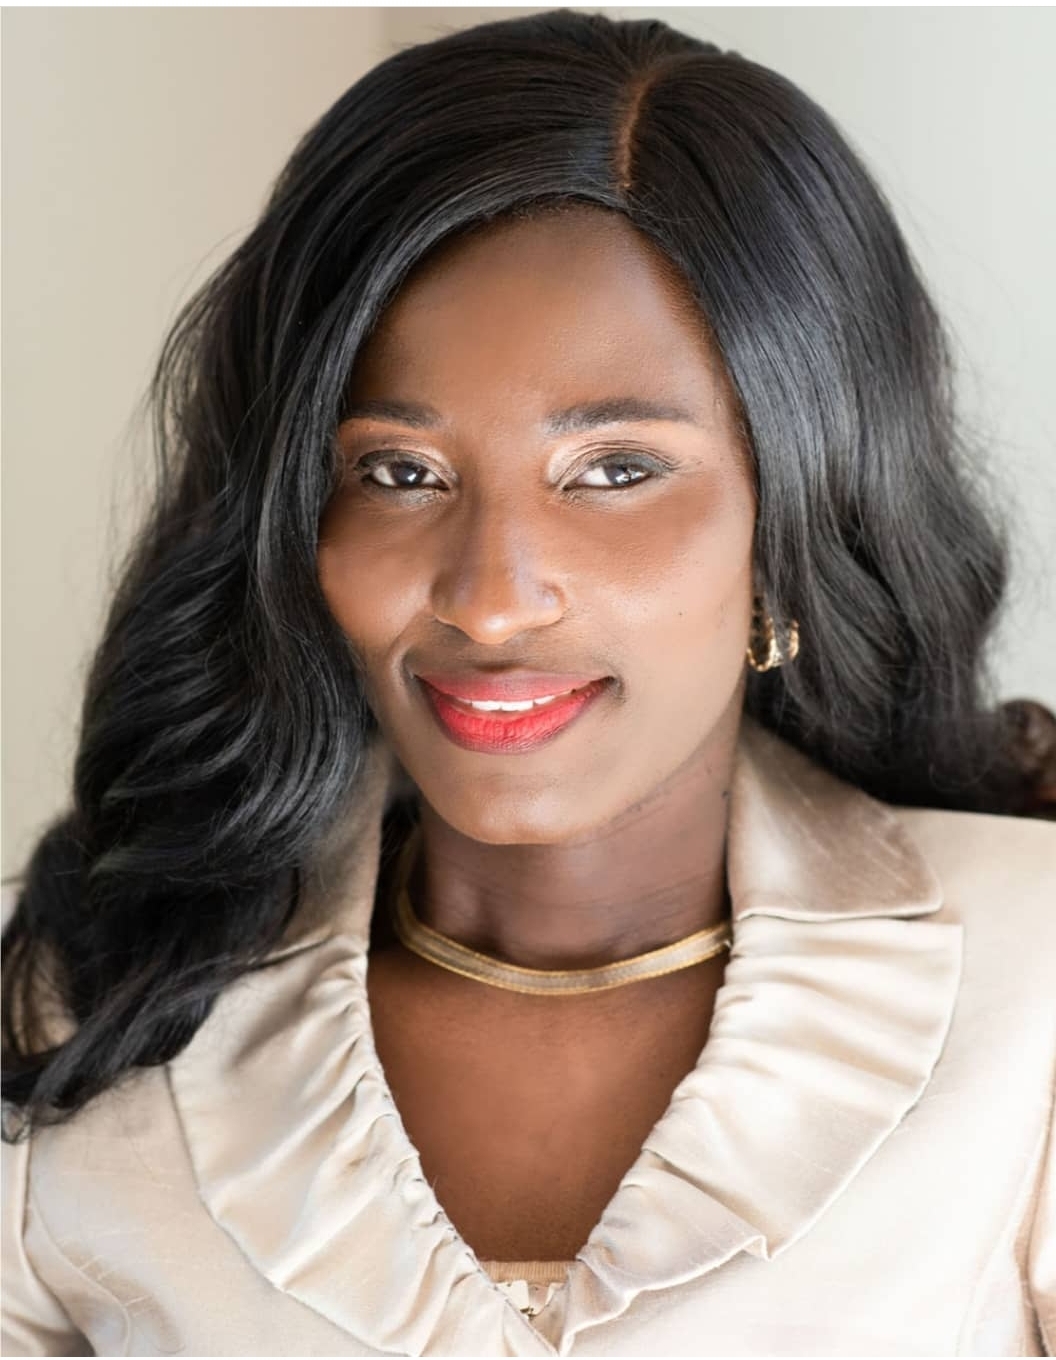 Josephine Baah, founder of Blissful Royal Creations